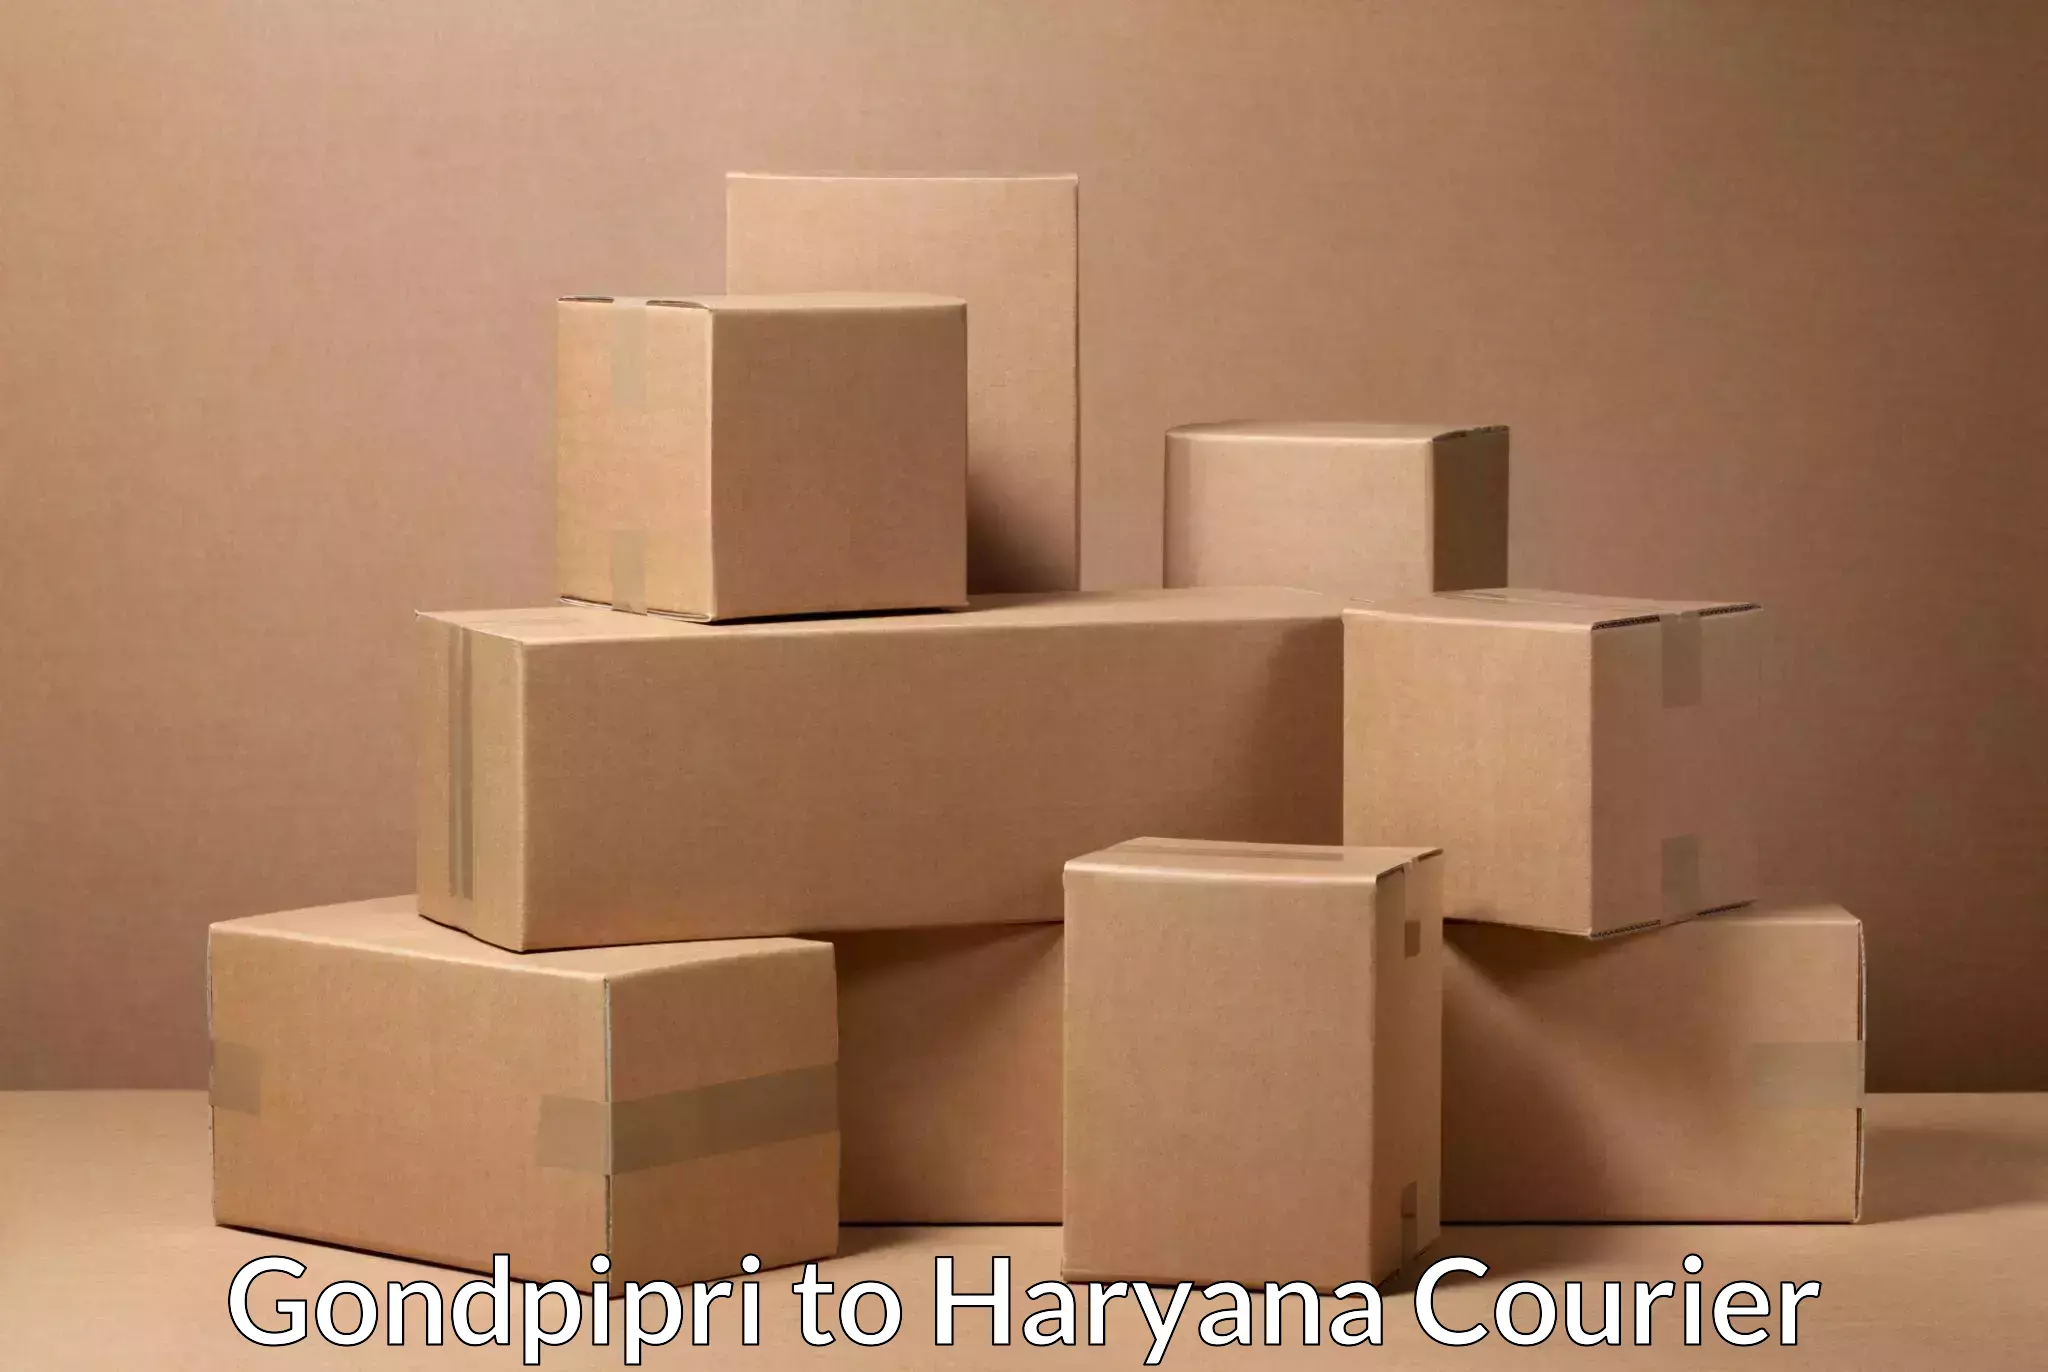 Personalized courier solutions Gondpipri to Chaudhary Charan Singh Haryana Agricultural University Hisar